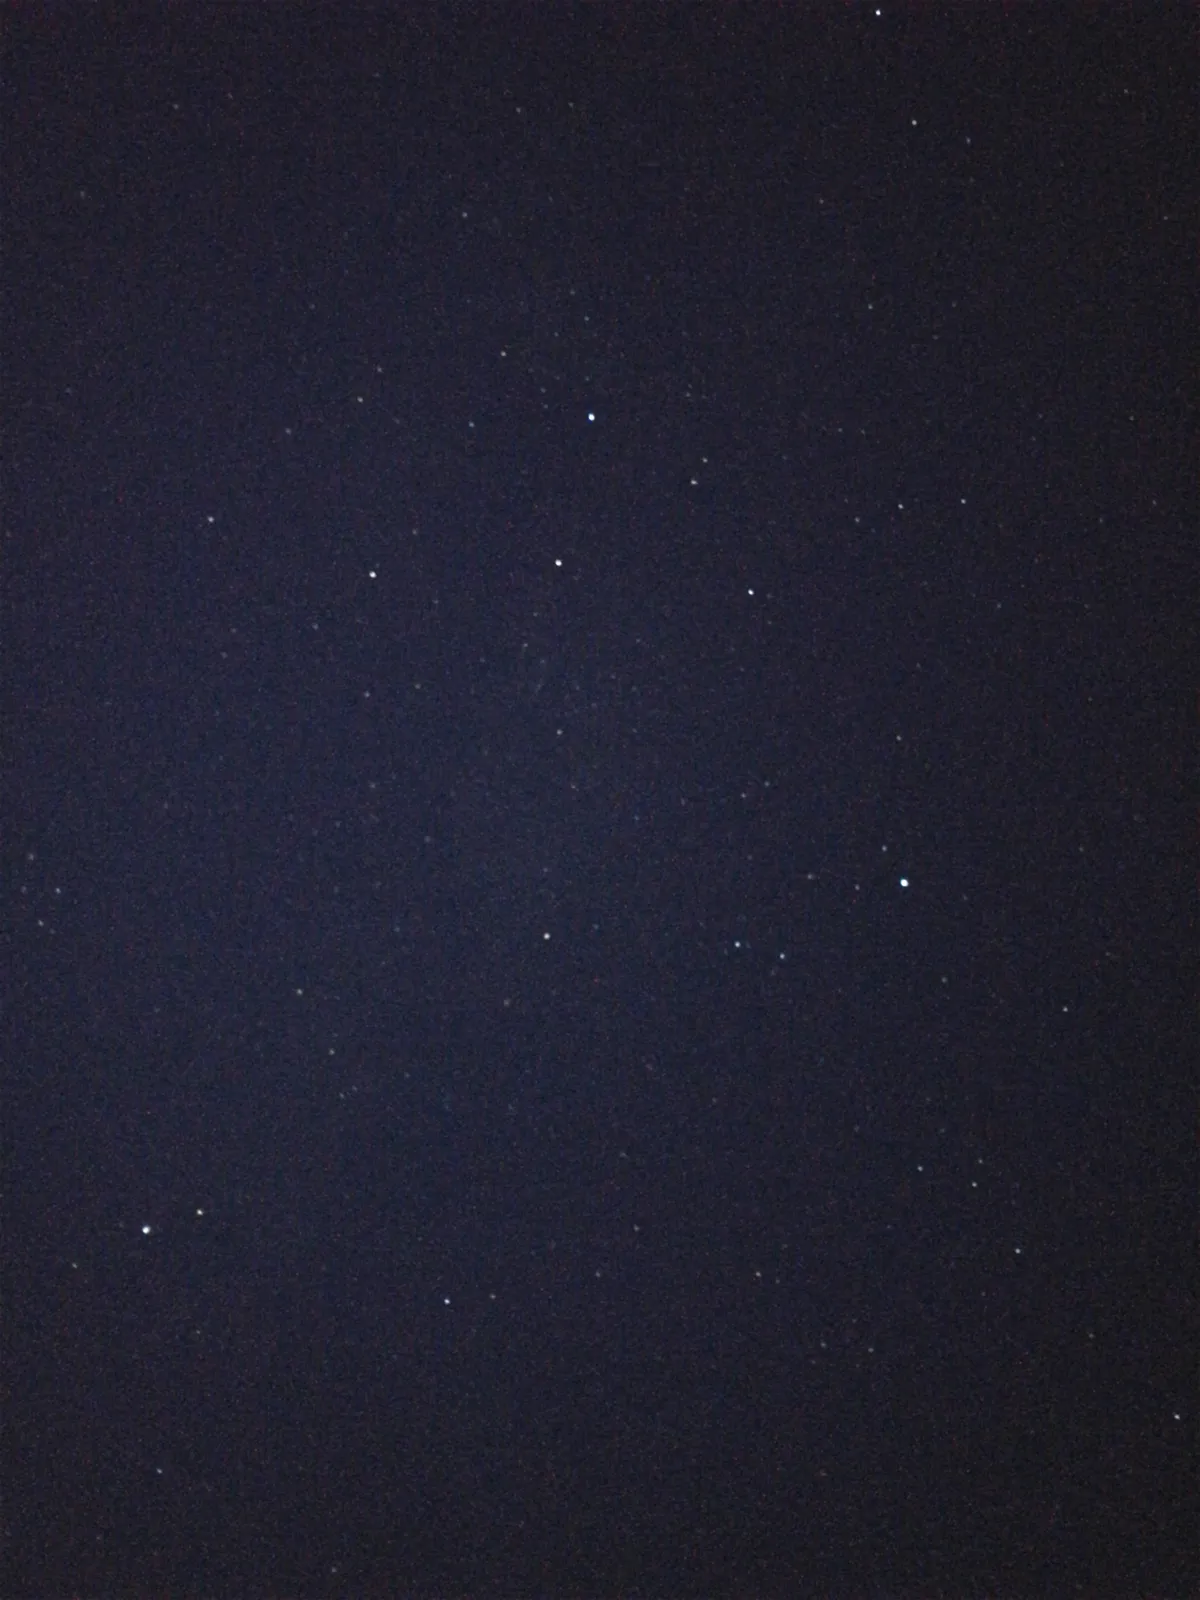 The Summer Triangle taken with the NightCap app. Long Exposure mode, 30.05 second exposure, 1/3s shutter speed. Credit: Paul Money